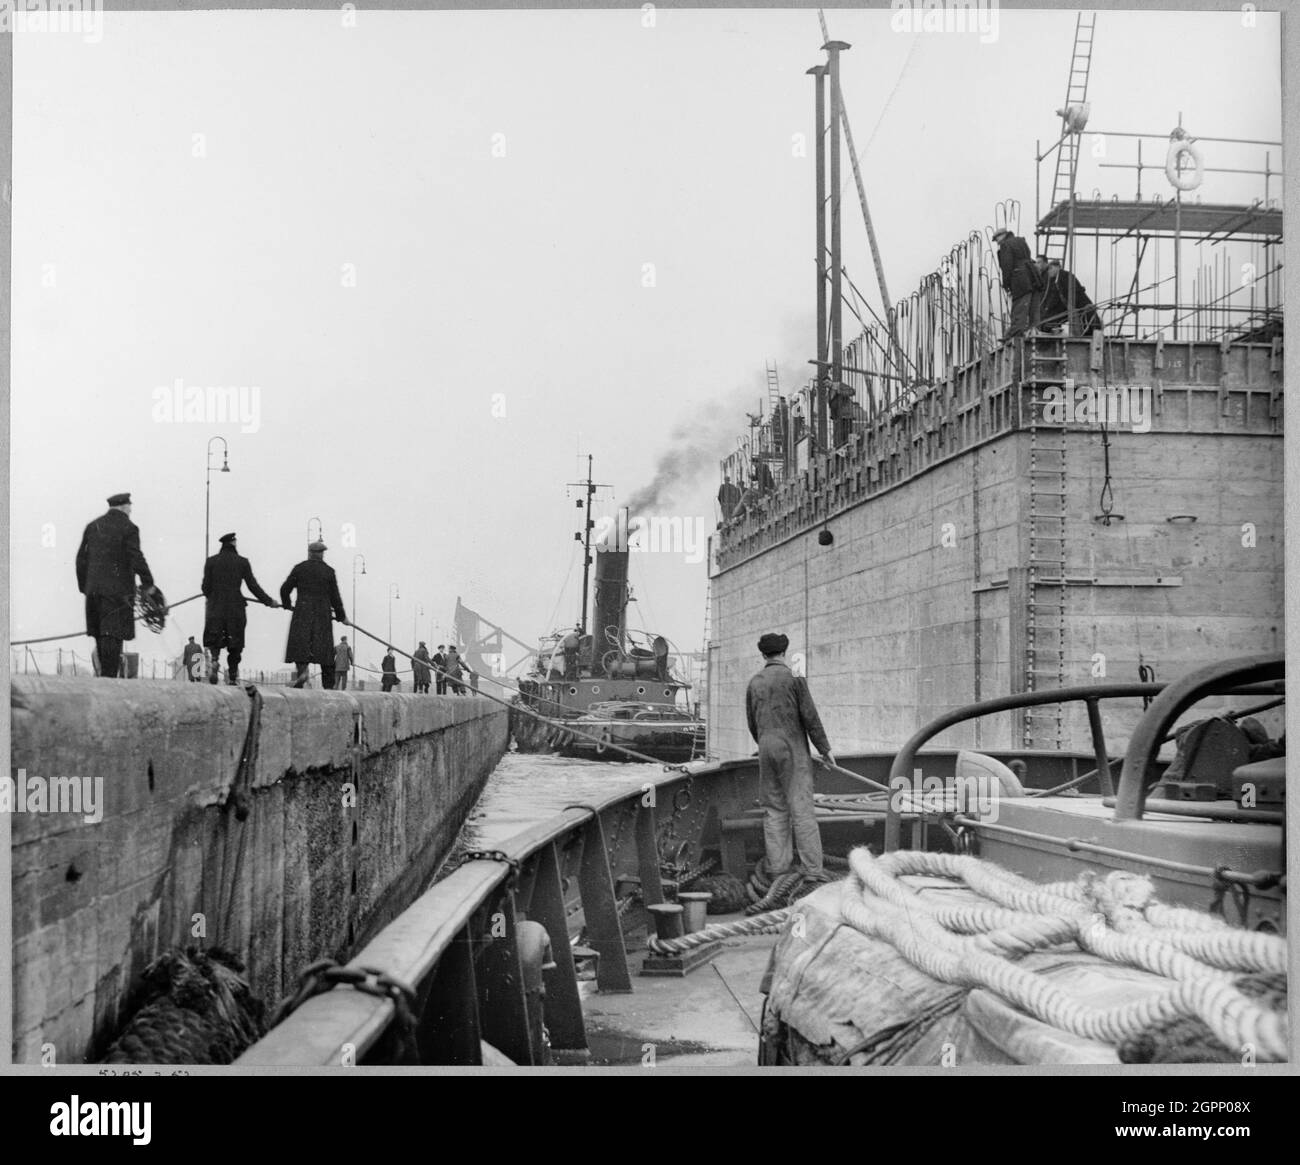 A view from a boat showing the cooling water intake caisson for Coryton Oil Refinery leaving Tilbury Docks, with people on the side of the lock using ropes to guide the structure. During the Second World War, John Laing &amp; Son Ltd had built some of the floating caissons for the Mulberry harbour which were used in the D-day landings. This 4,200 ton concrete water intake caisson was built along the lines of the Mulberry harbour and was towed 8 miles down the Thames from Tilbury Dock to be installed as part of Coryton Oil Refinery in March 1952. It was built between 1951 and 1952. Stock Photo